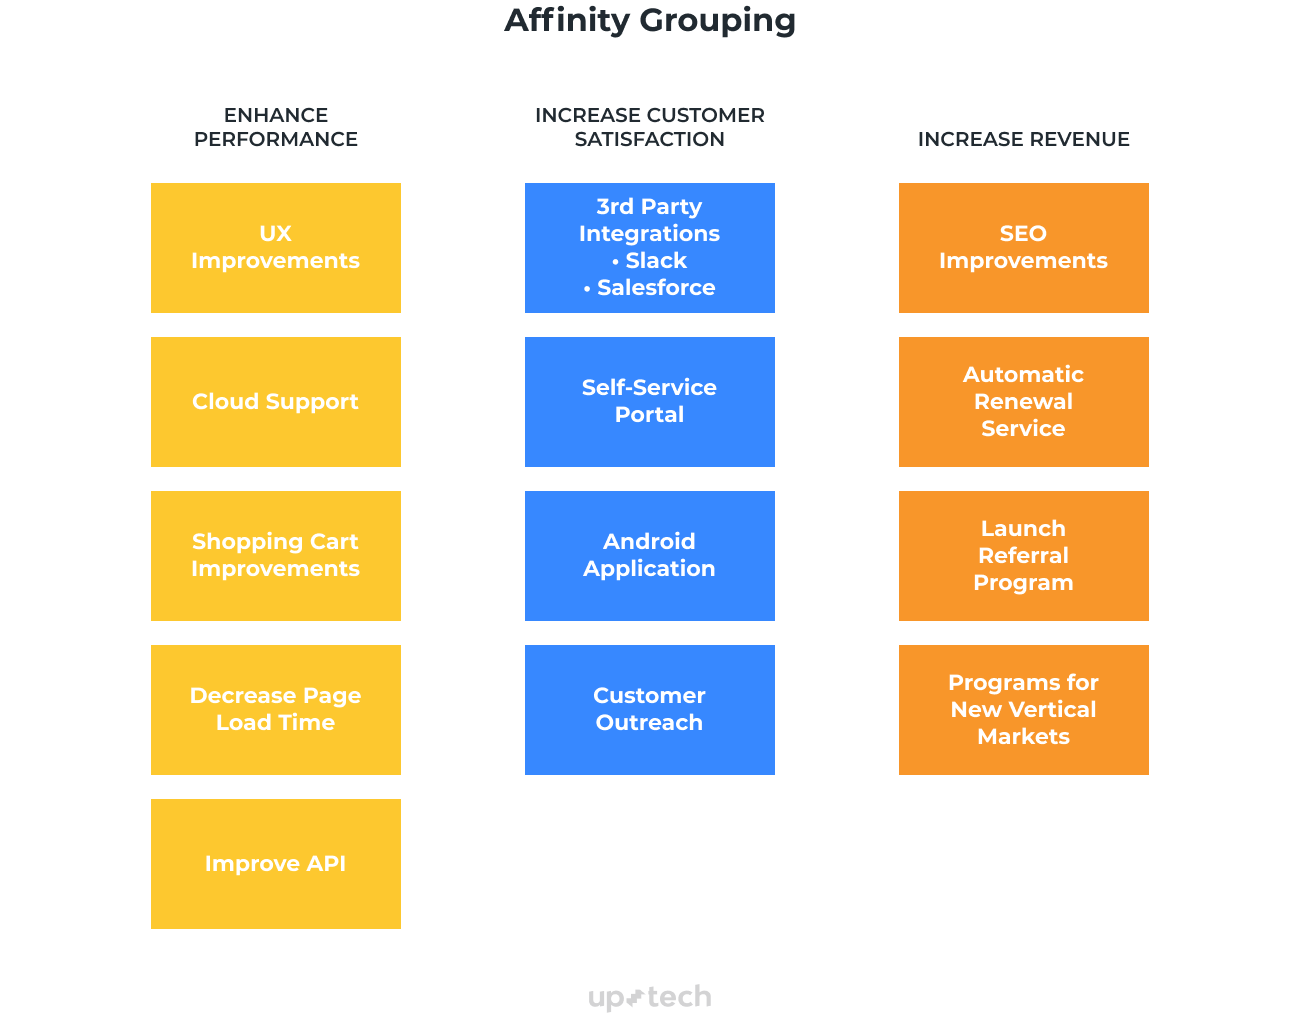 Example of an affinity grouping framework